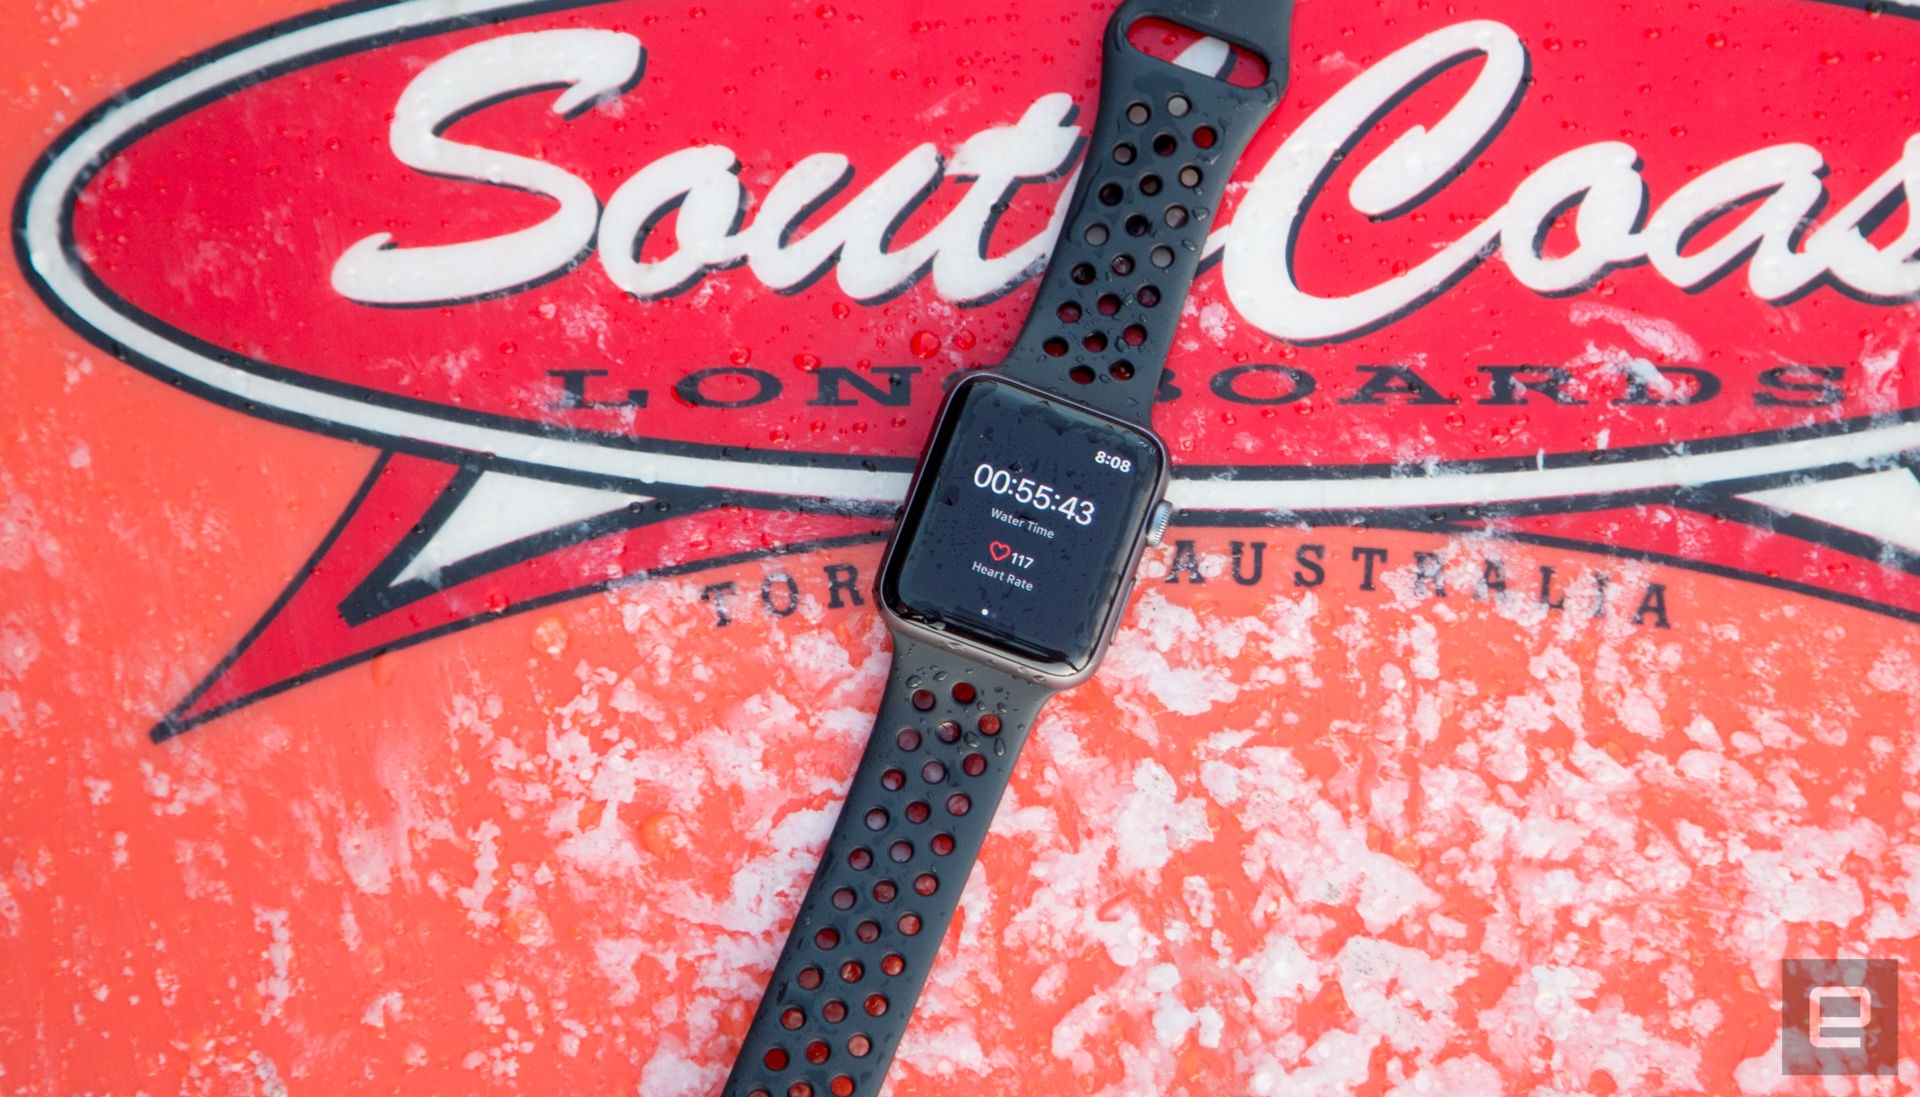 Surfline’s Apple Watch app will record your next big wave ride | DeviceDaily.com